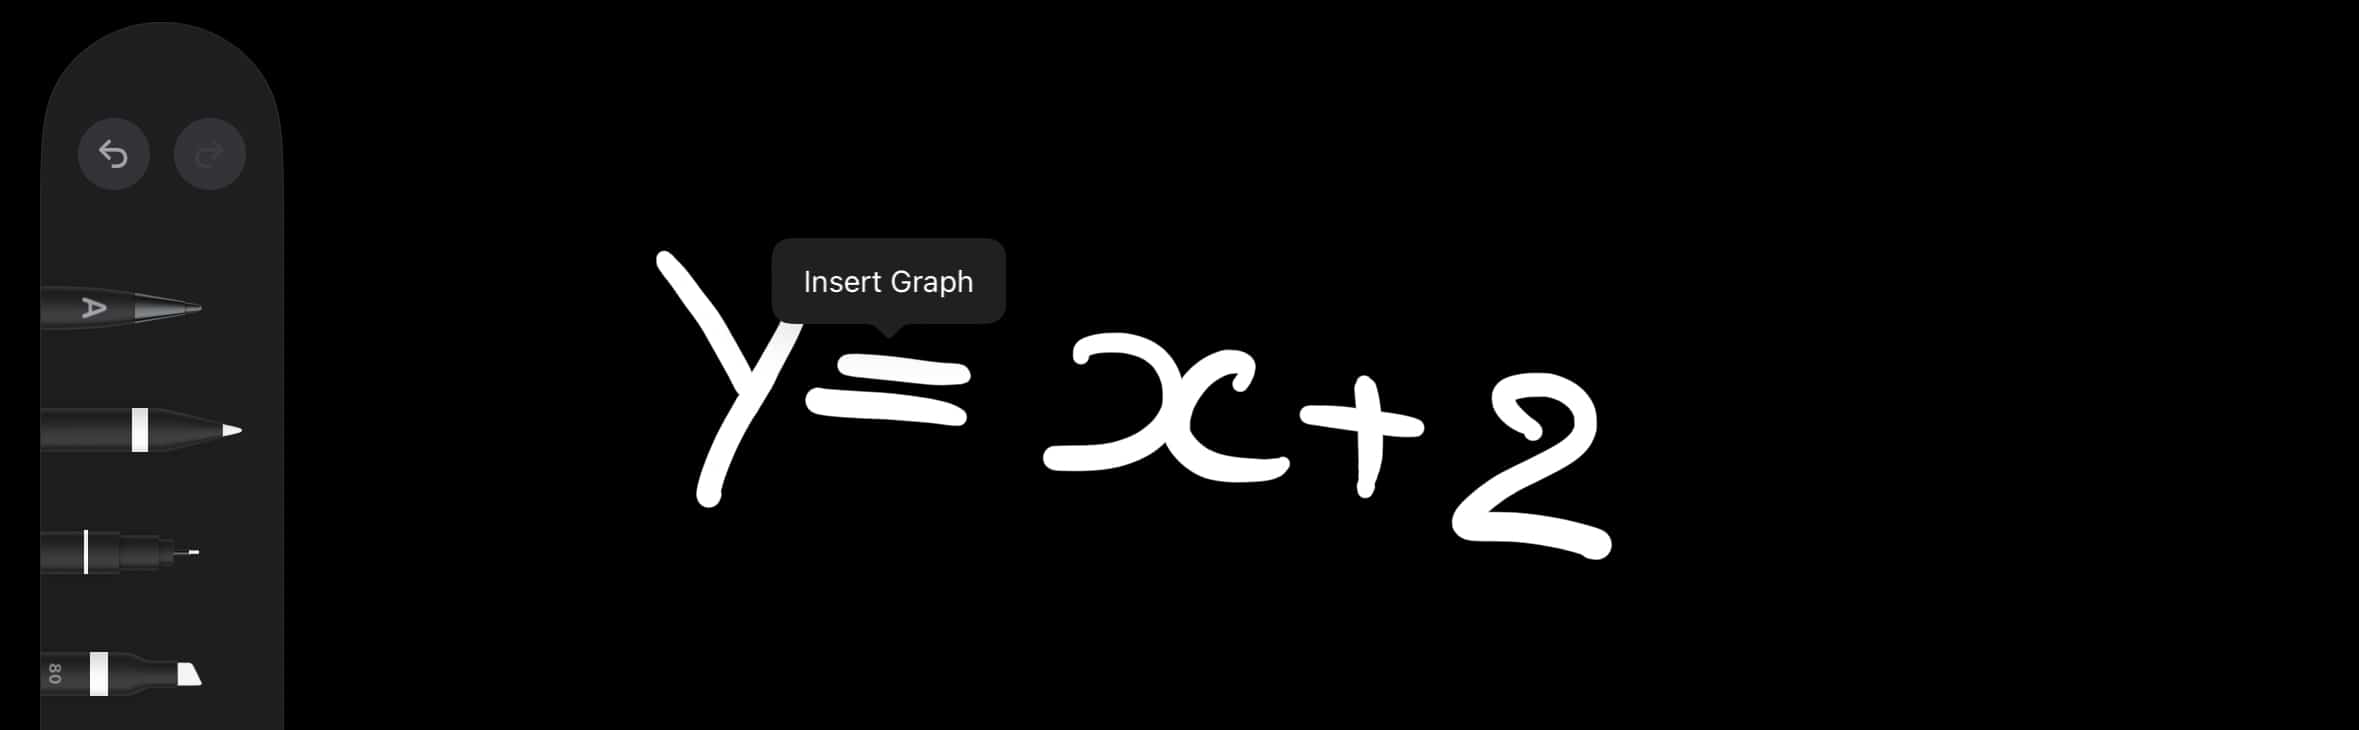 Insert Graph in Math Notes on iPad